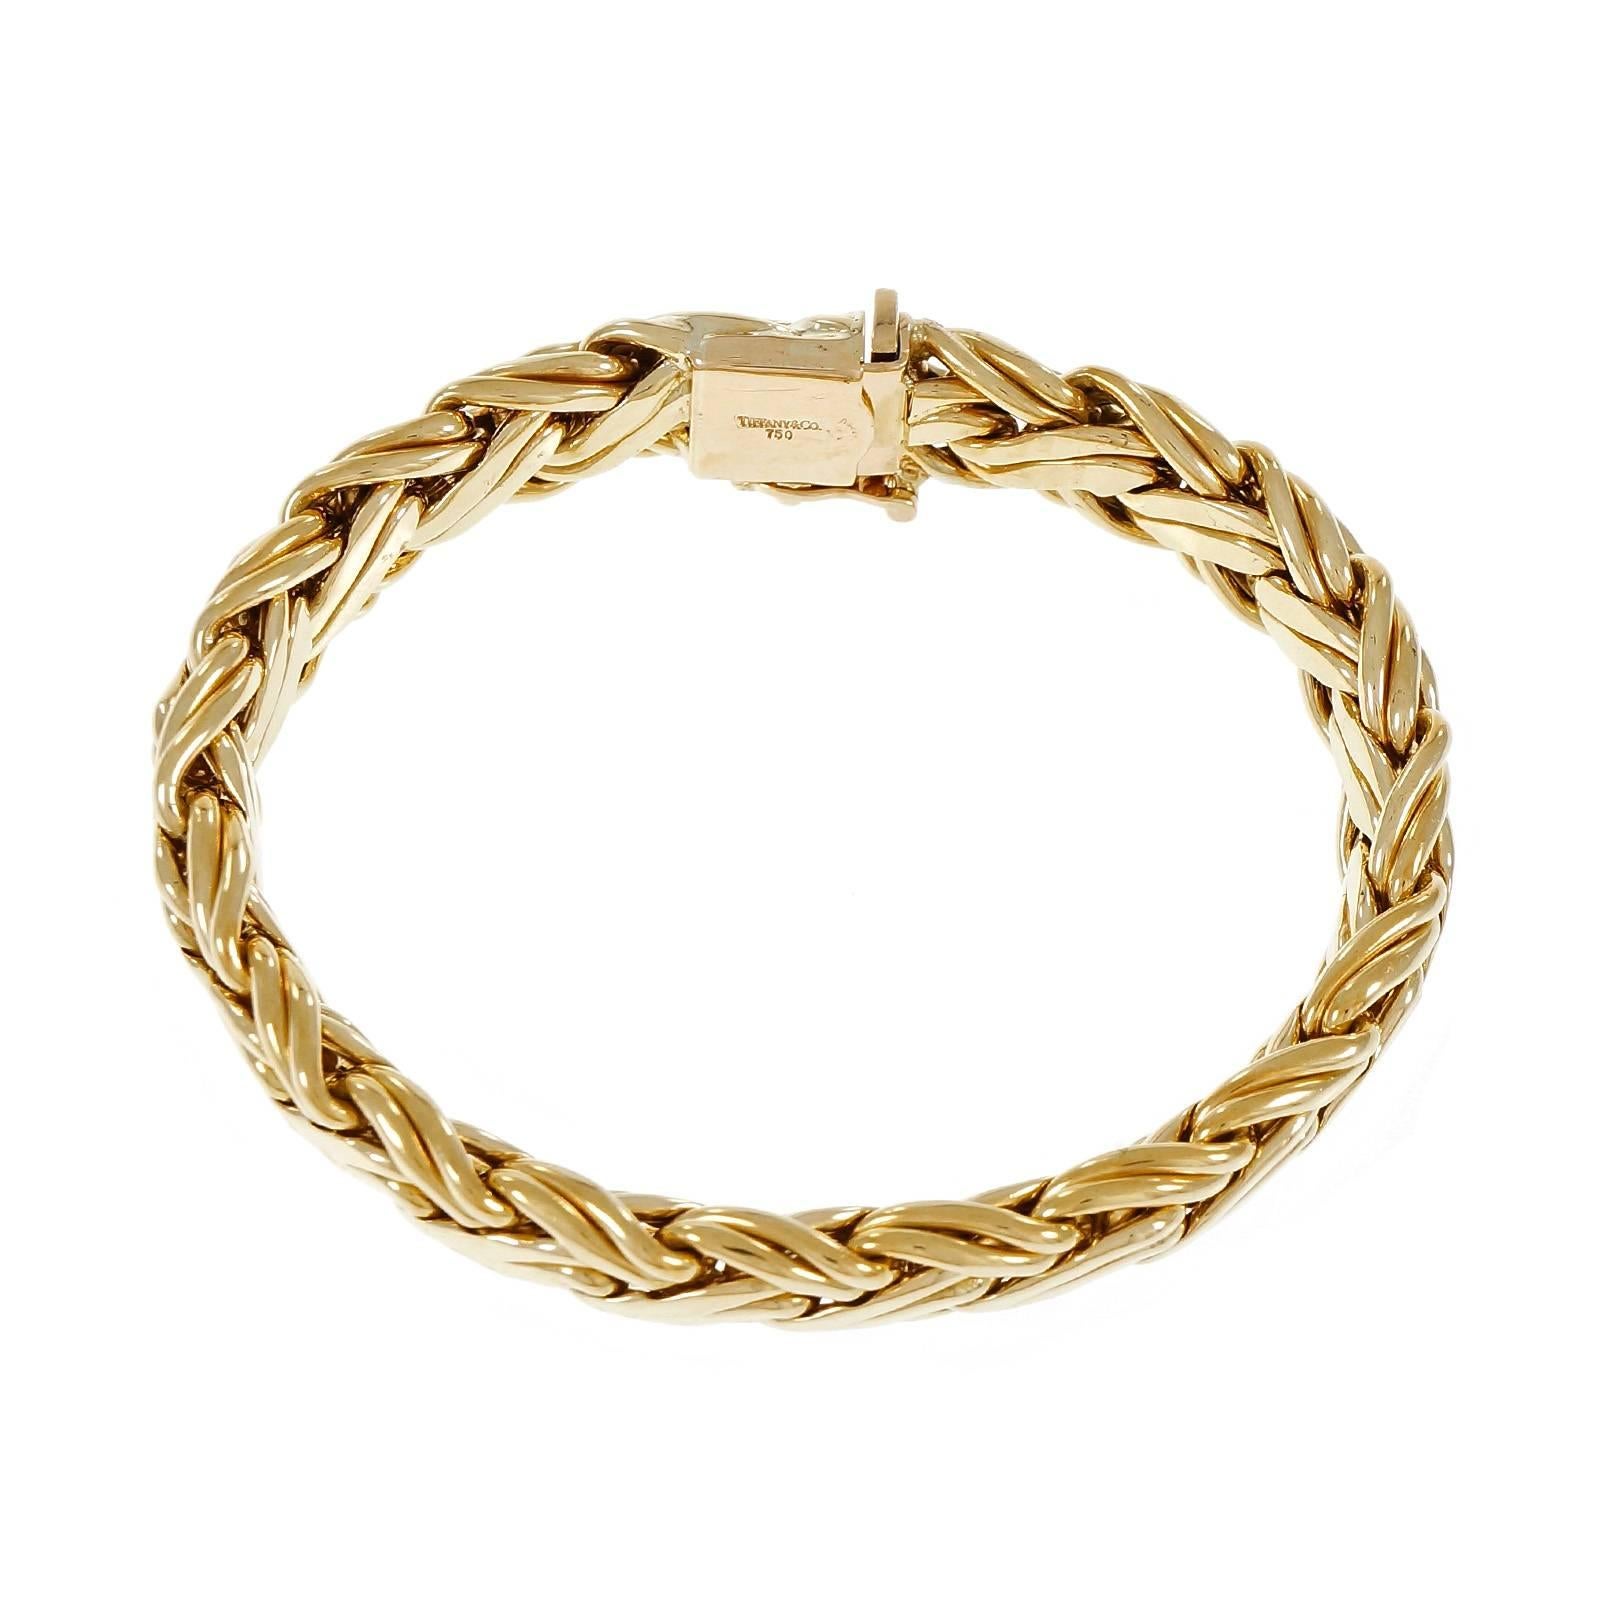 Tiffany & Co 18k yellow gold Russian weave braid woven bracelet. 

18k yellow gold
34.4 grams
Tested: 18k
Stamped: 750
Hallmark: Tiffany & Co
Length: 7.625 inches
Width: 9.75mm
Depth: 5.30mm

